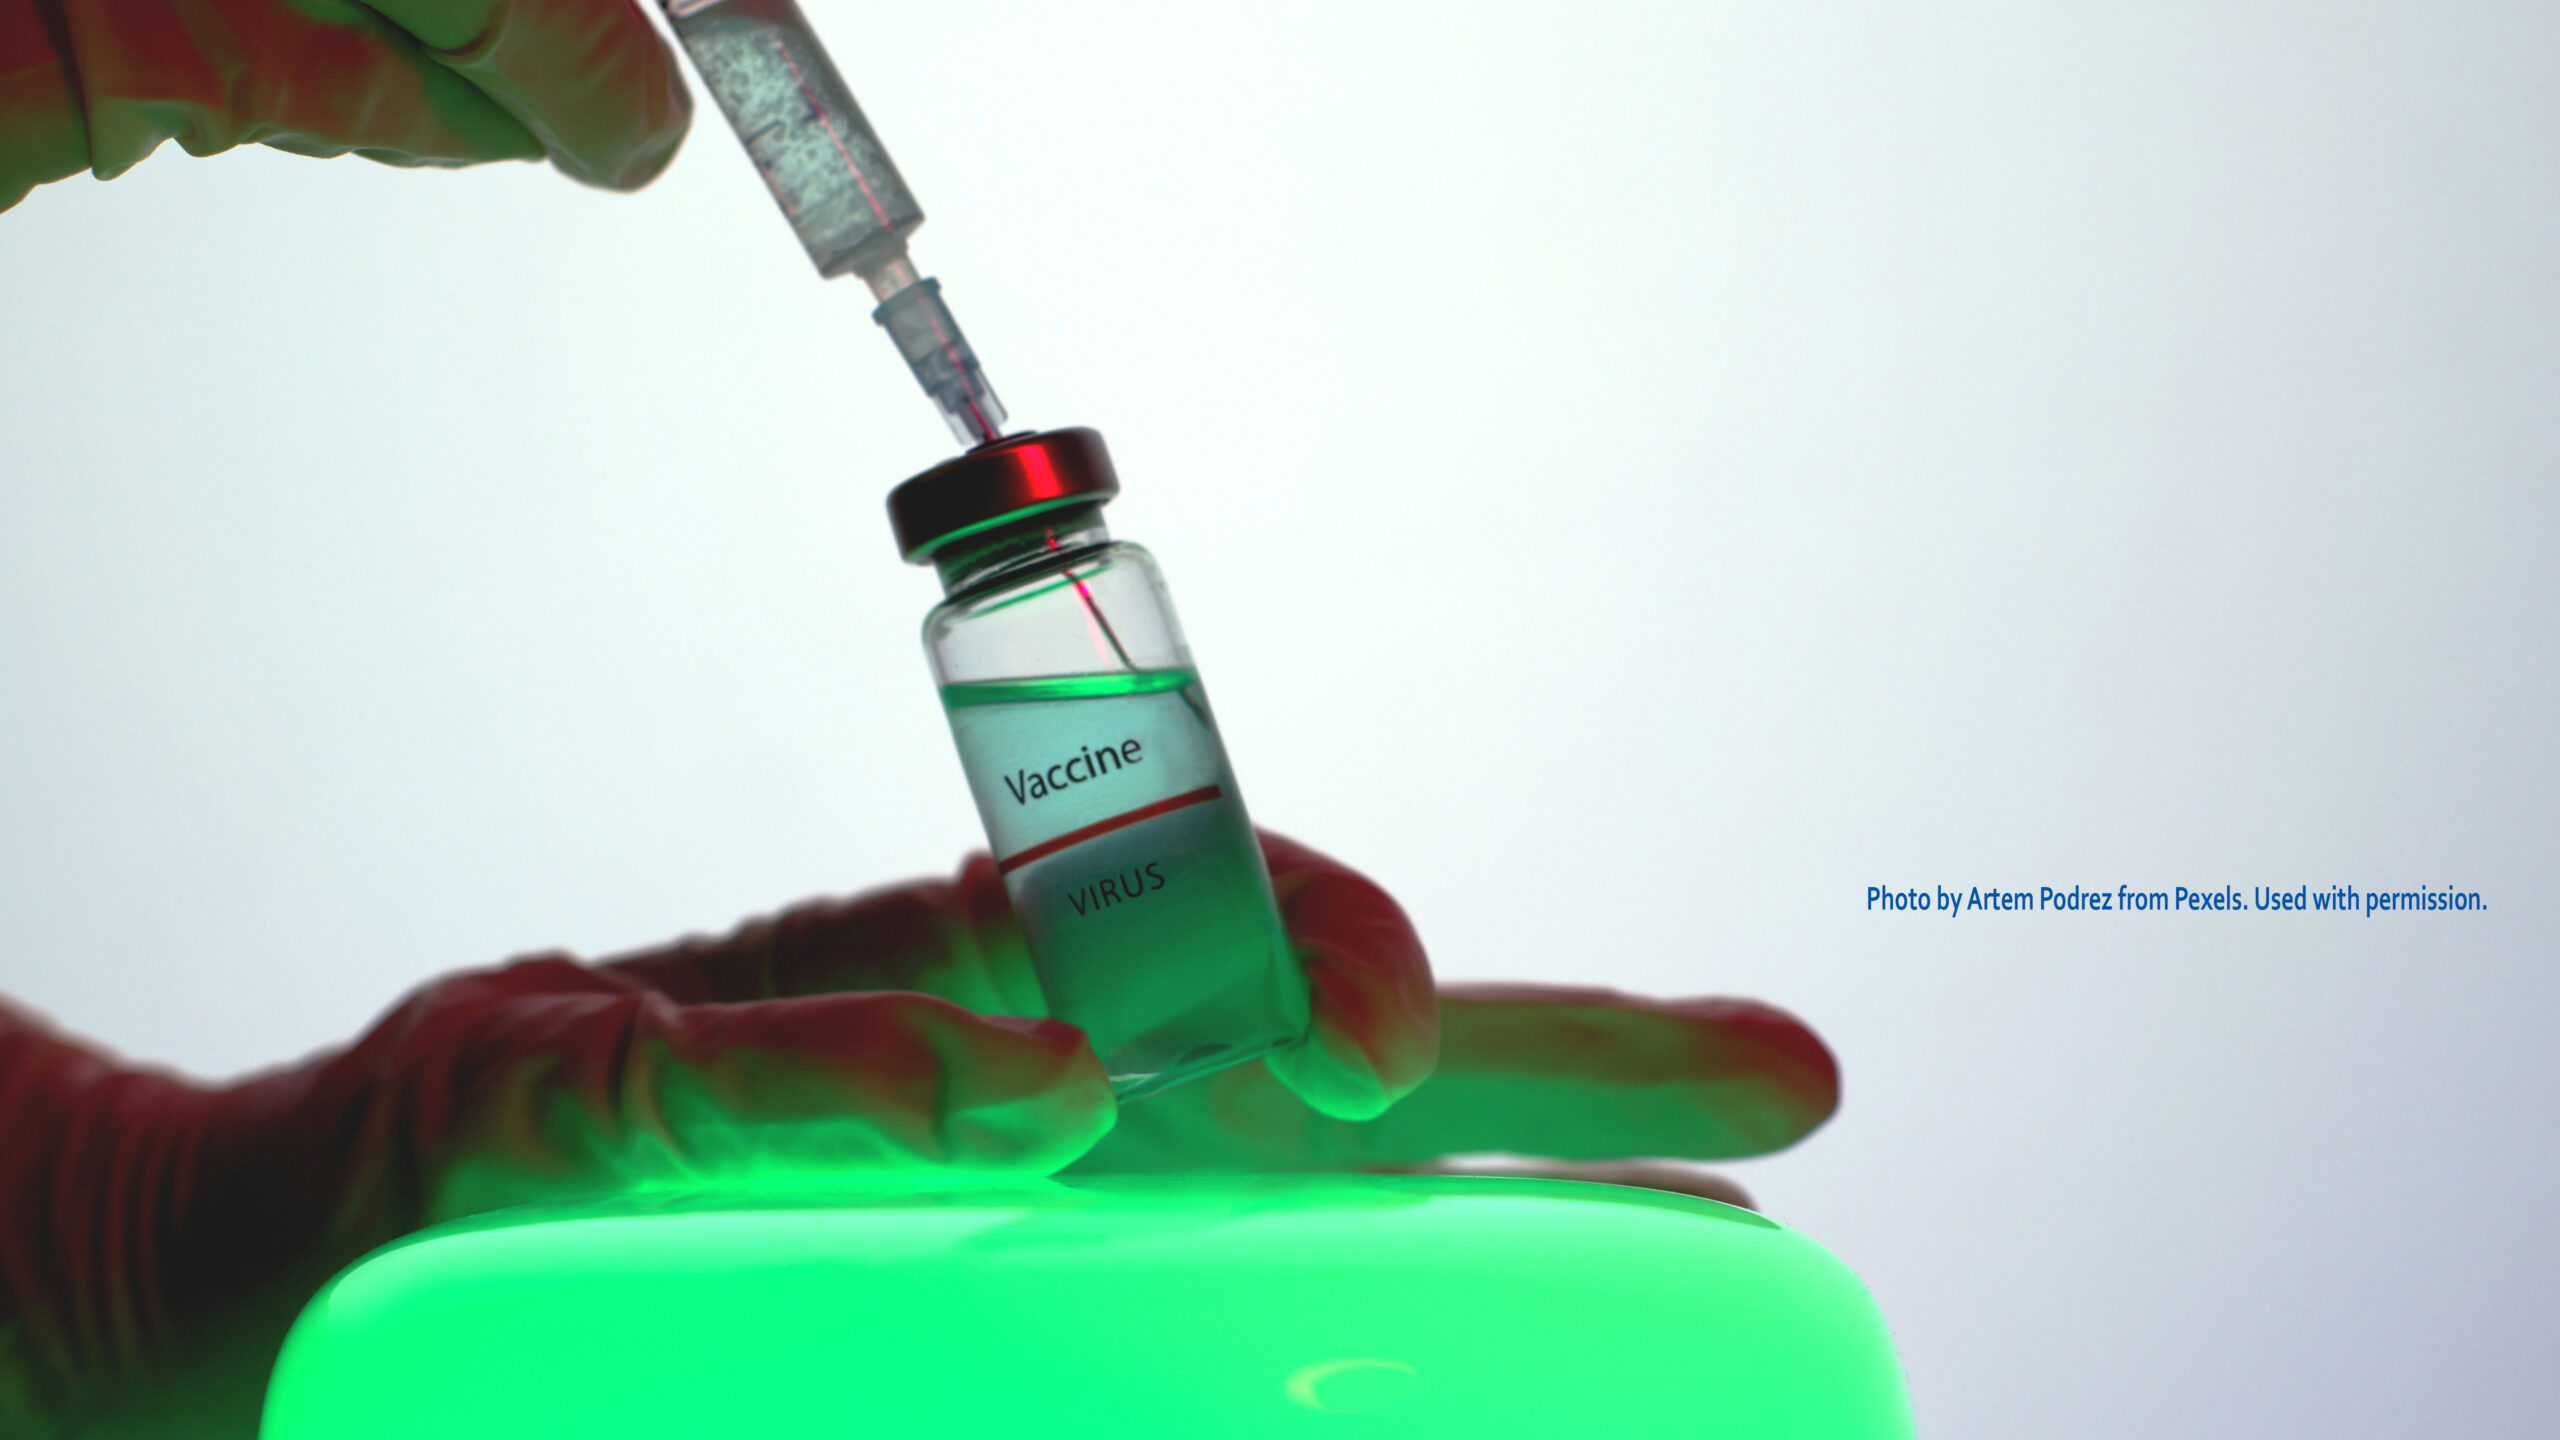 Syringe inserted in vaccine vial. Photo by Artem Podrez from Pexels. Used with permission.